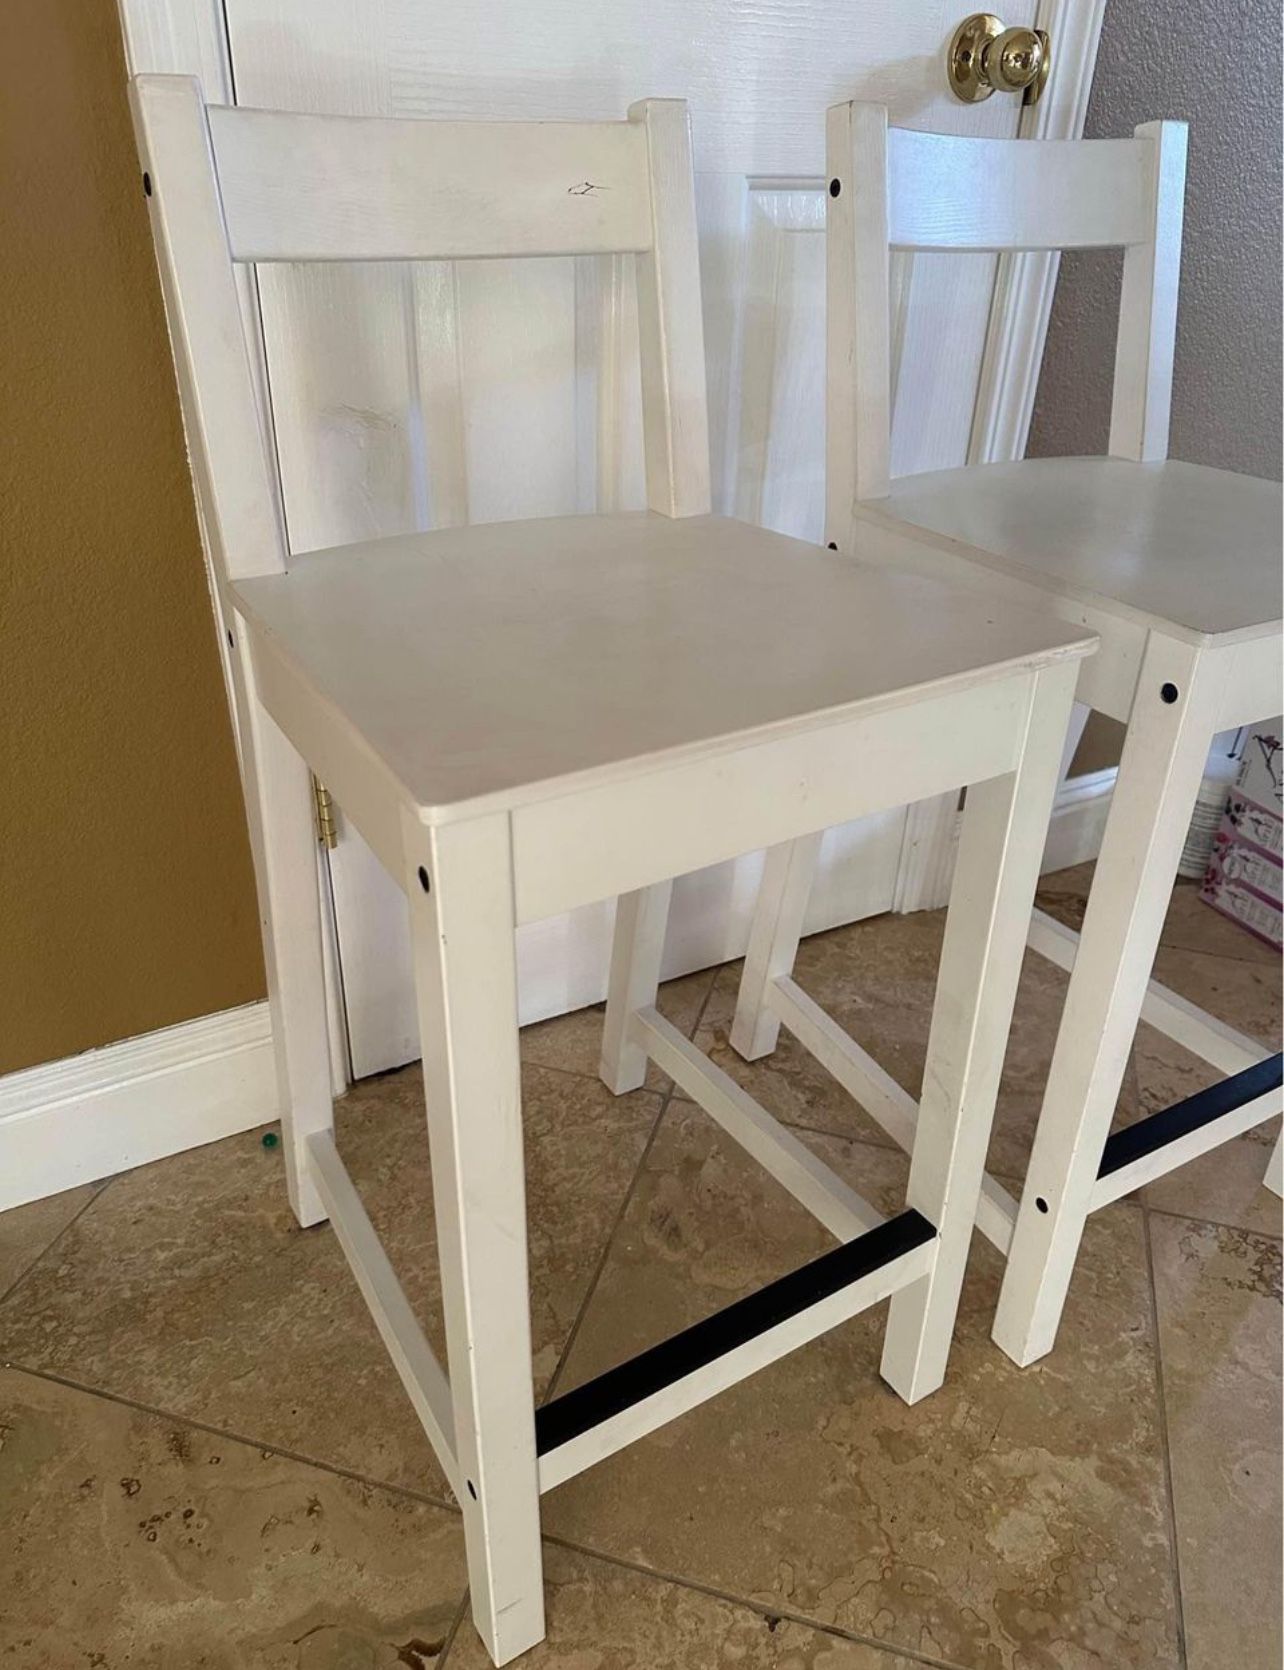 2pcs Chairs For $30